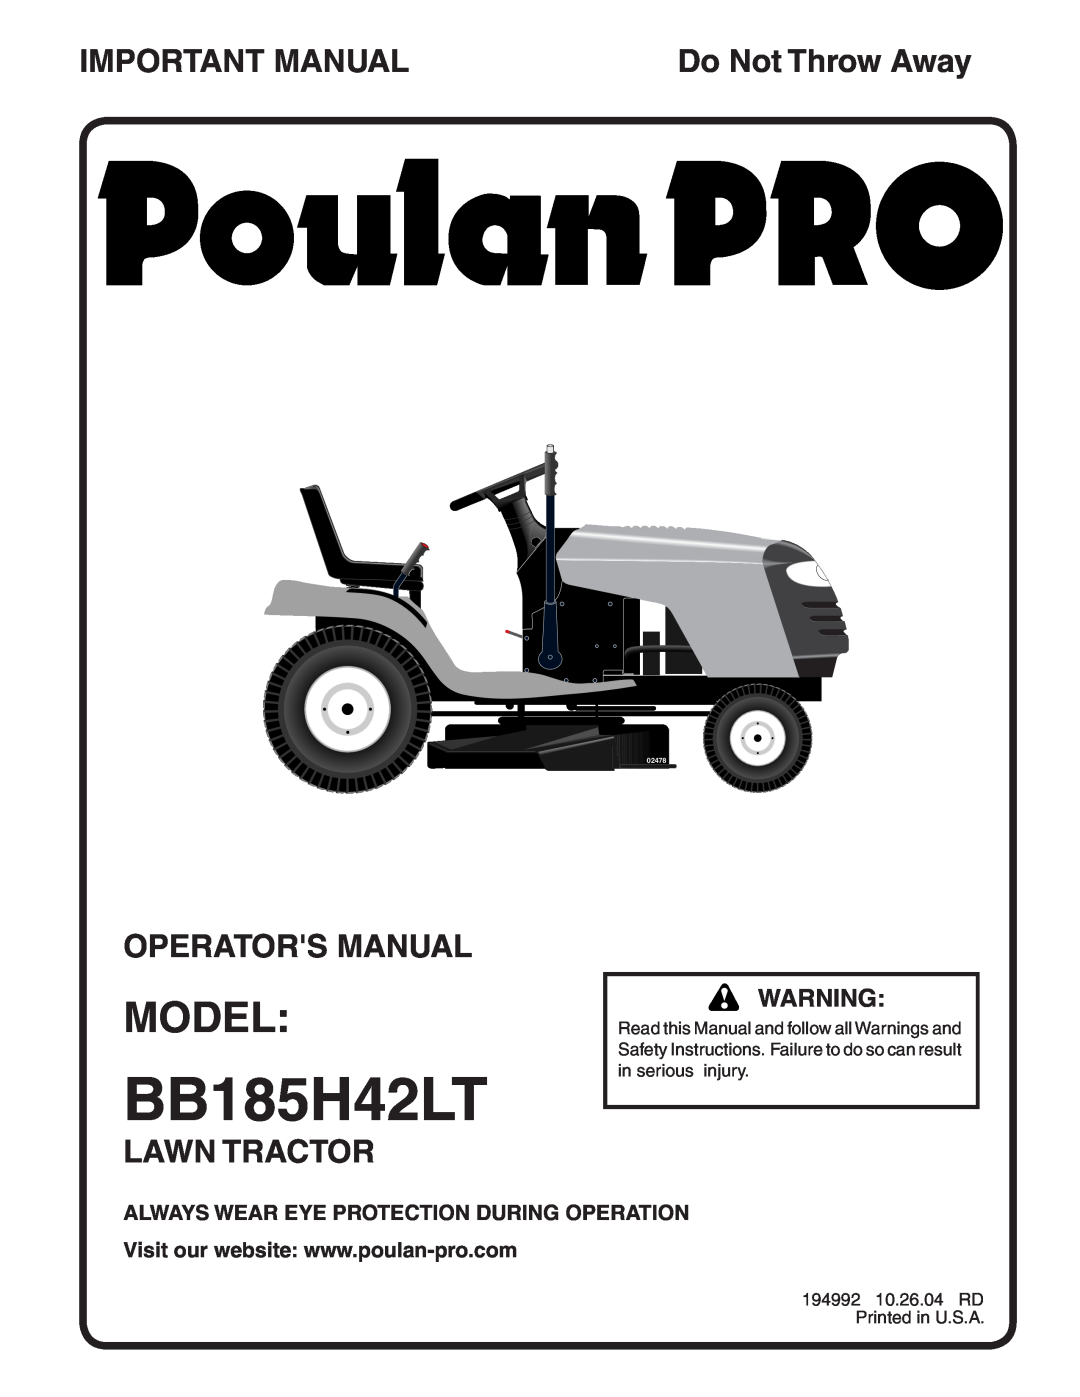 Poulan 194992 manual Model, Important Manual, Operators Manual, Lawn Tractor, Always Wear Eye Protection During Operation 